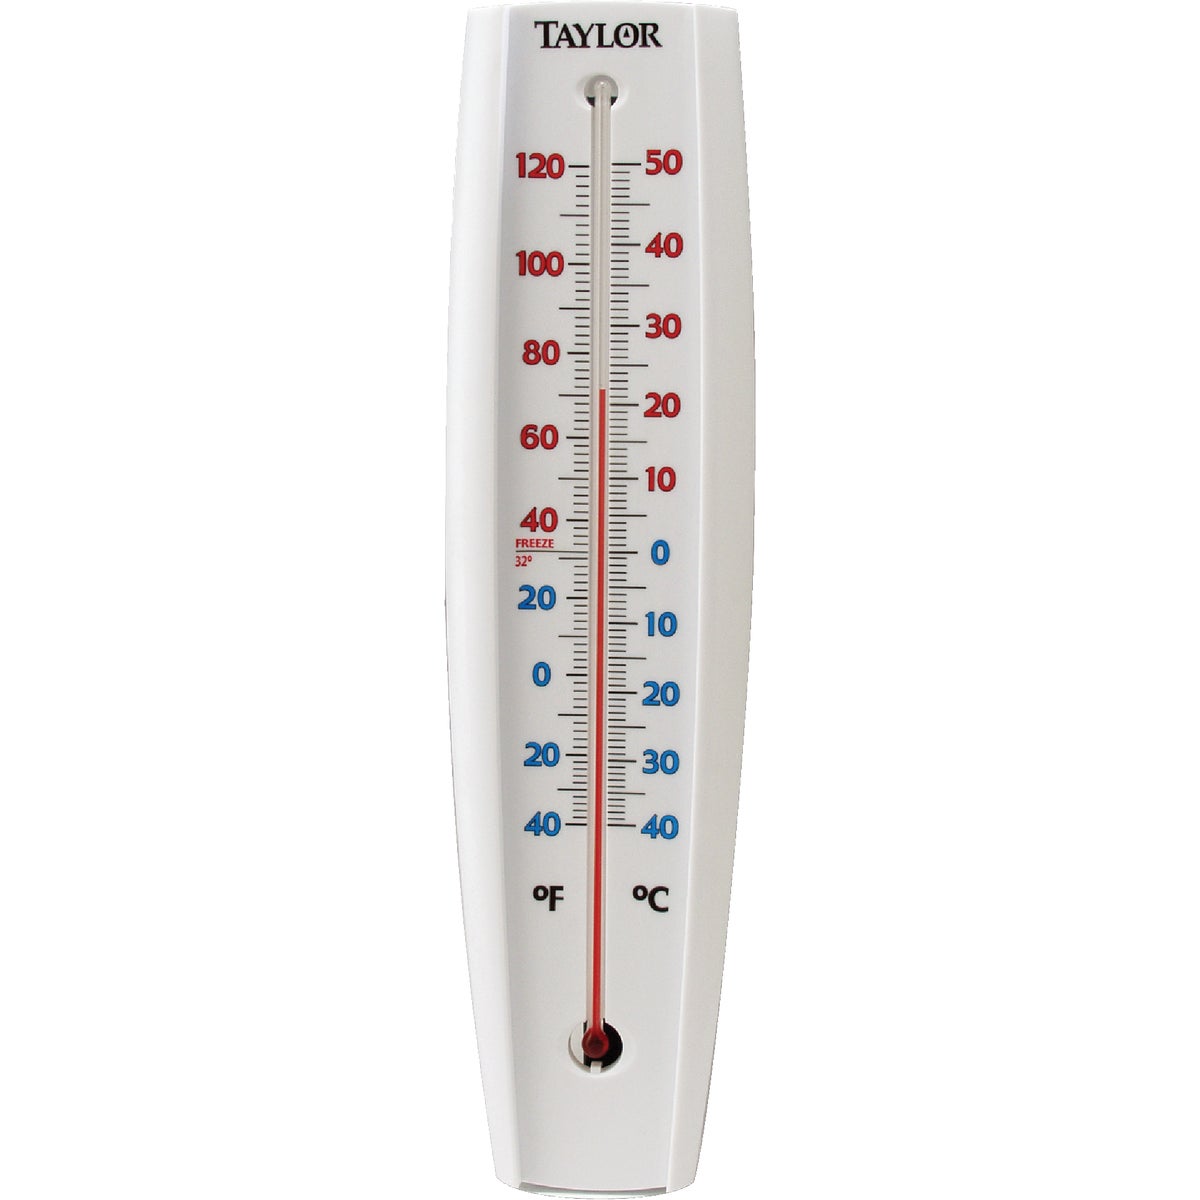 Item 652547, New, curved shape, 14-1/2" thermometer.